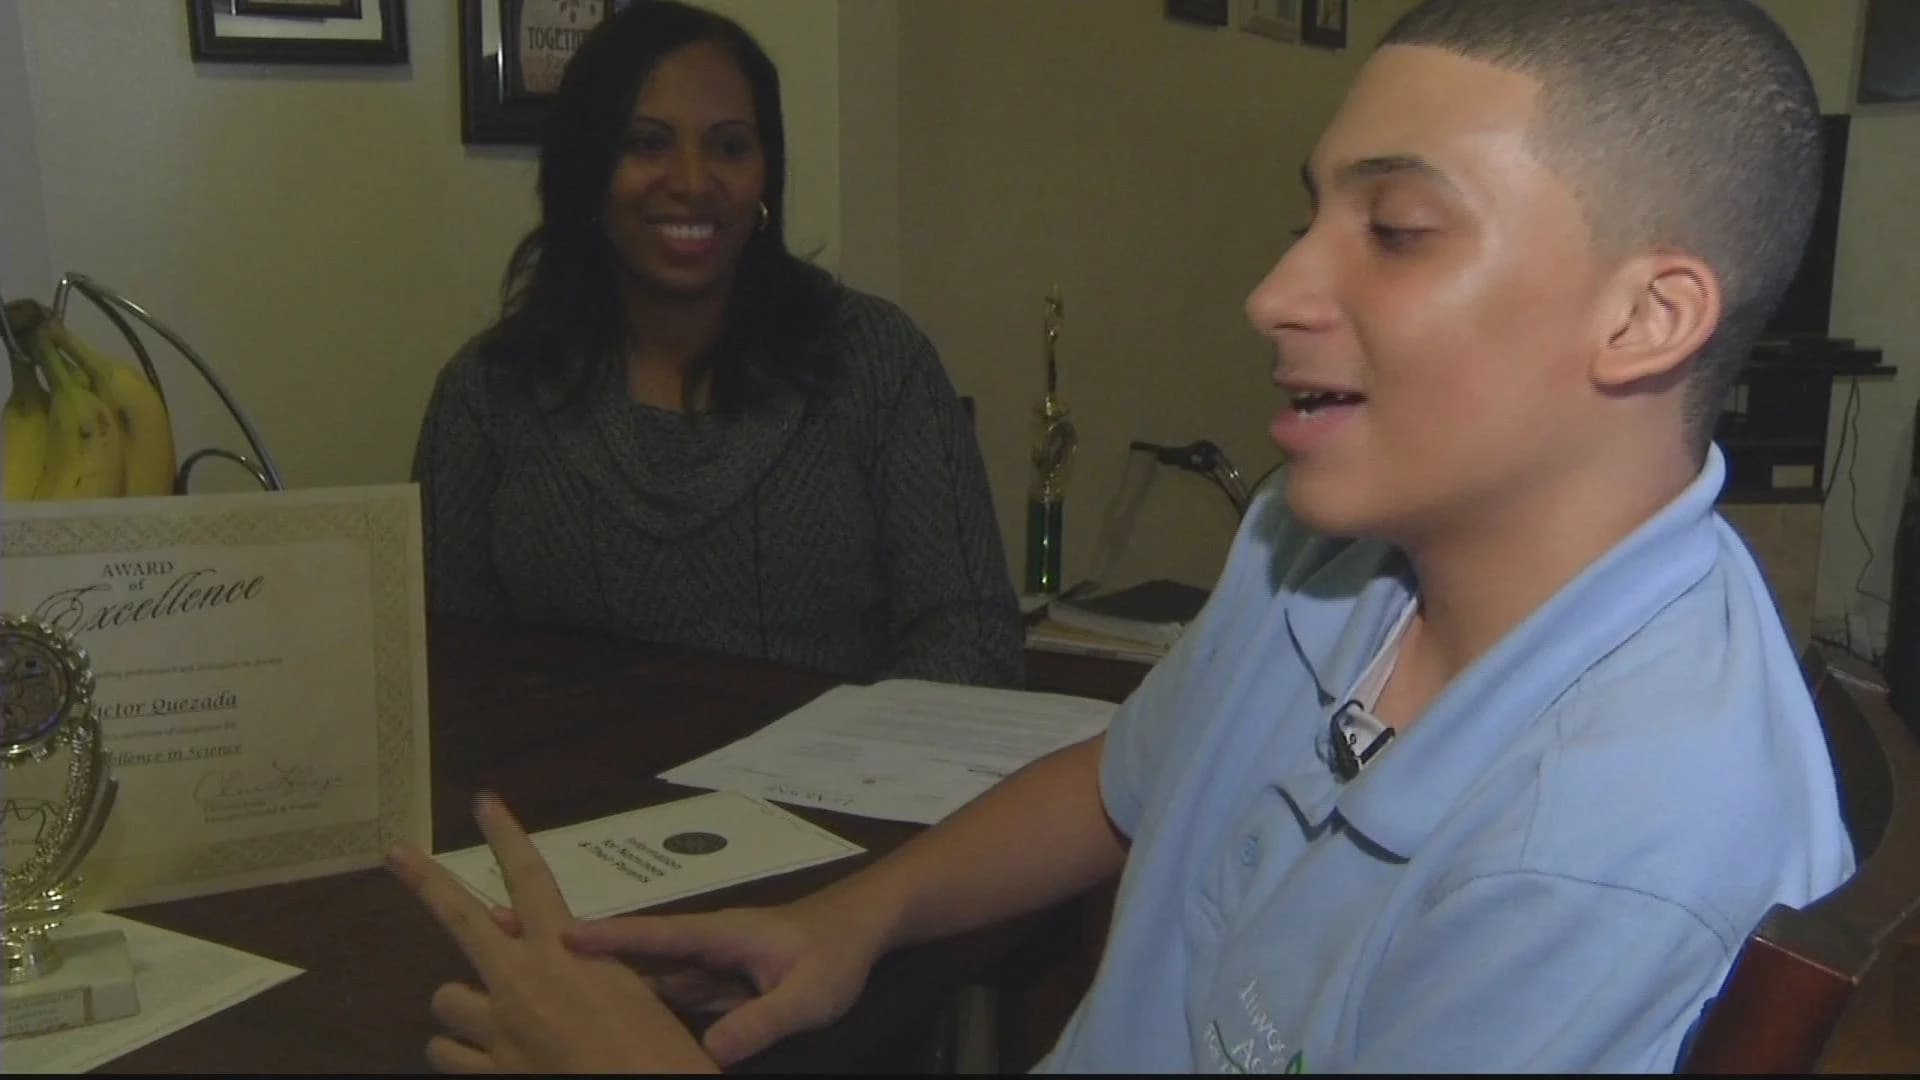 Best of the Bronx: Autistic Bronx teen to attend science and technology academy